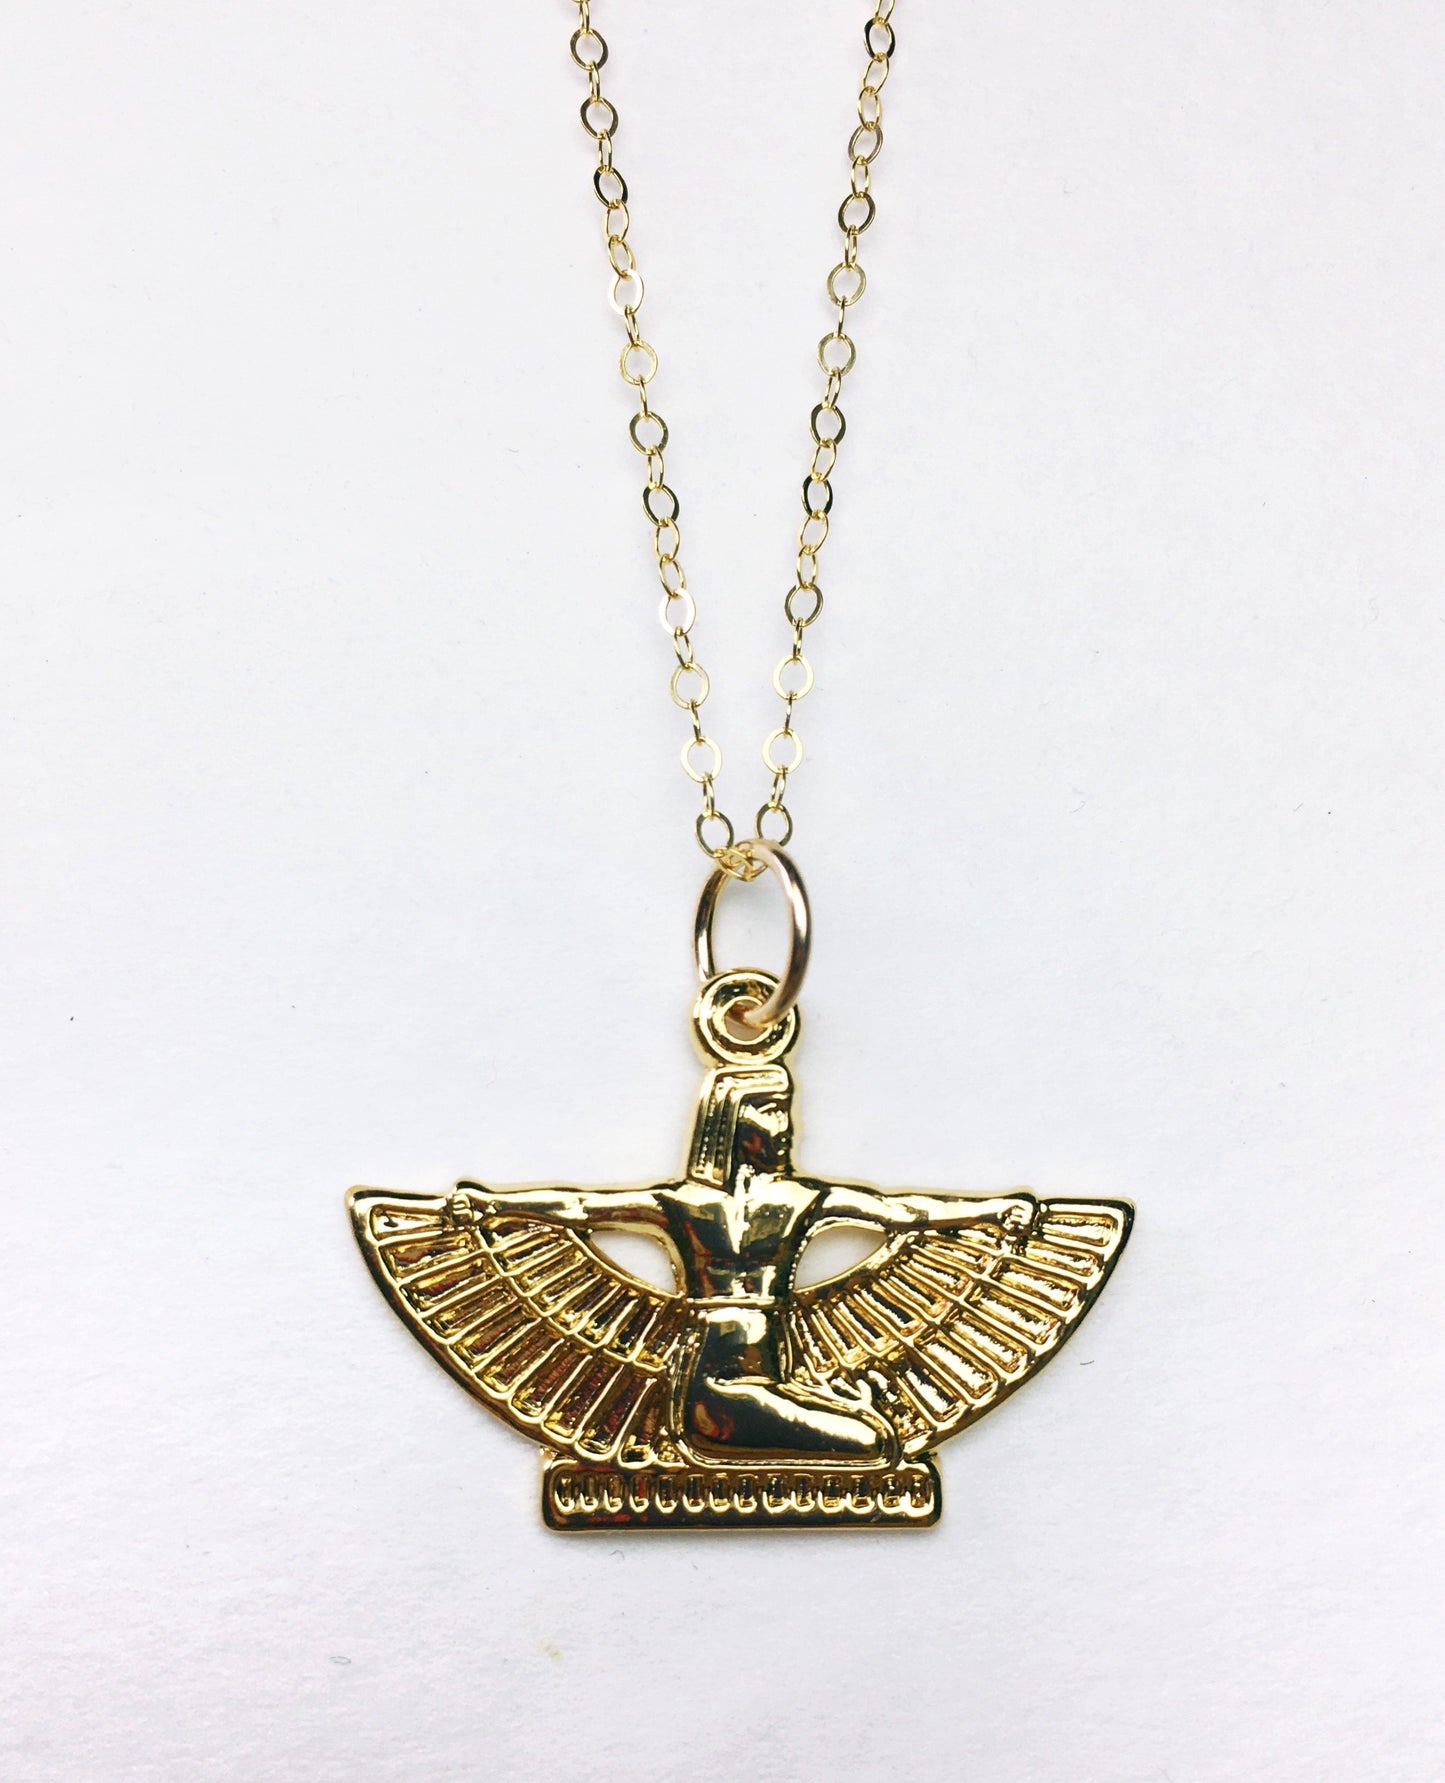 Diosa Isis Necklace - Luni